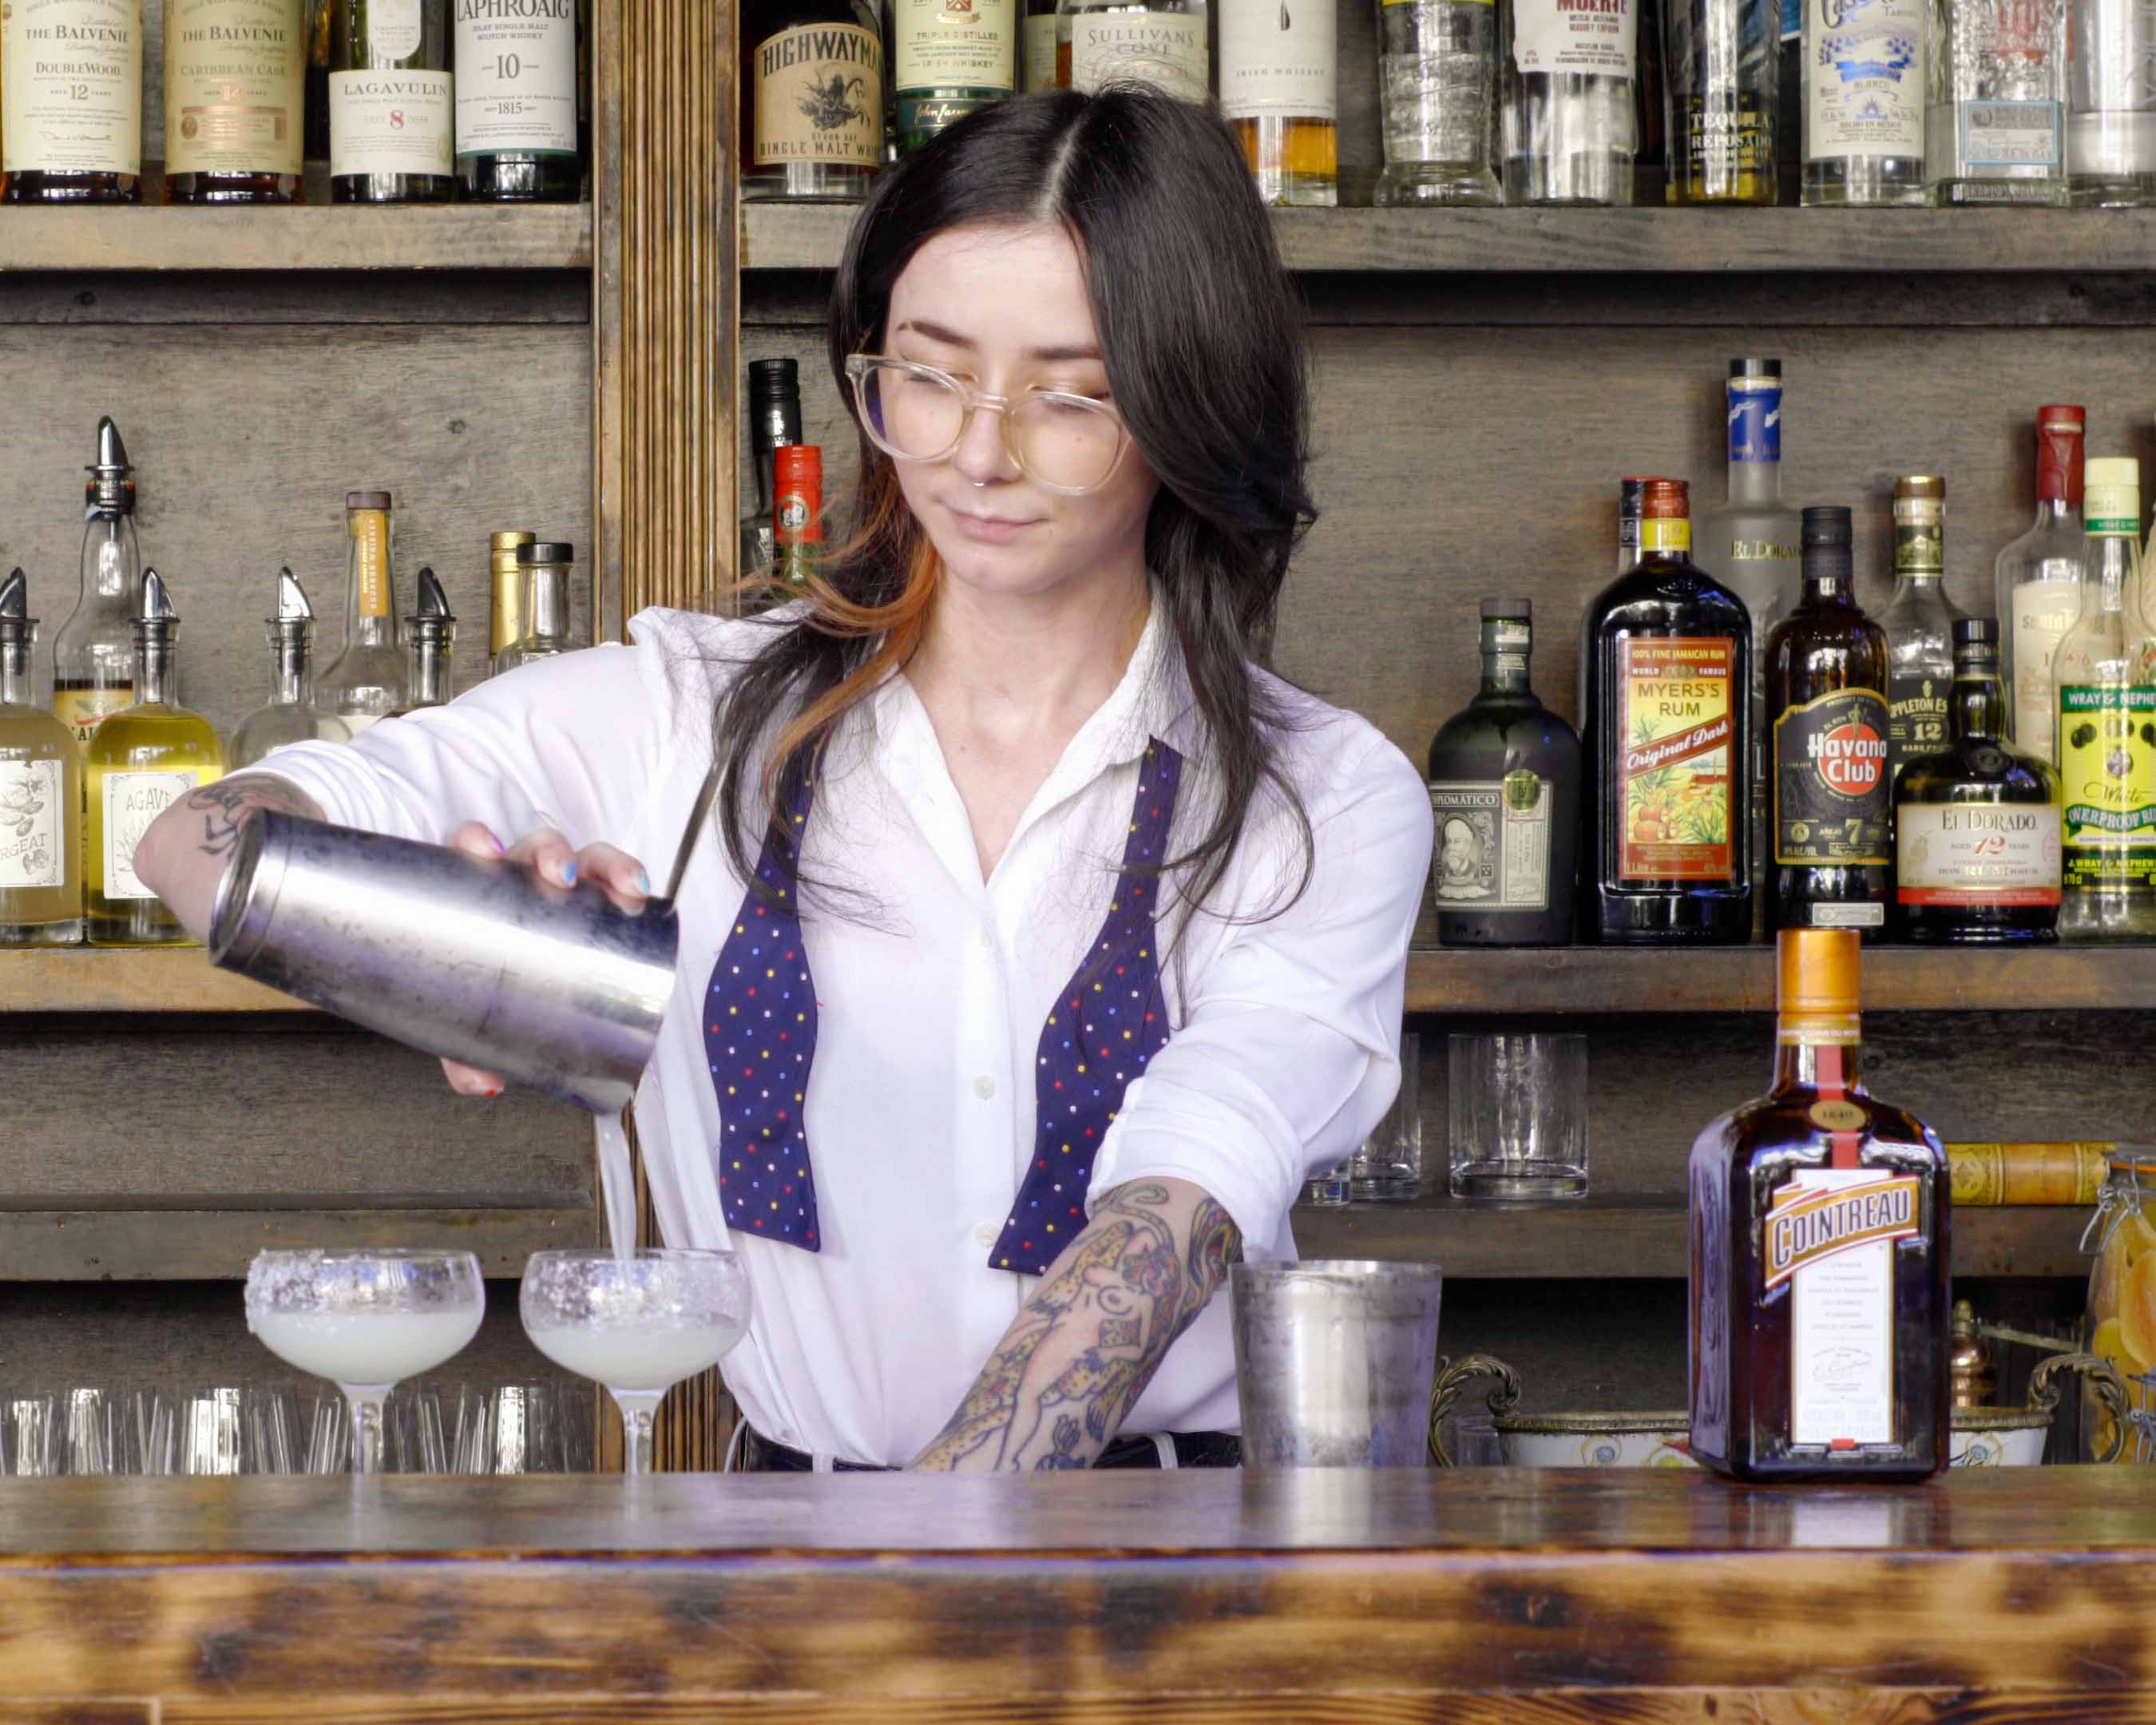 “Back yourself.” How hosting prepped Sarah Mycock to manage one of Sydney's best bars